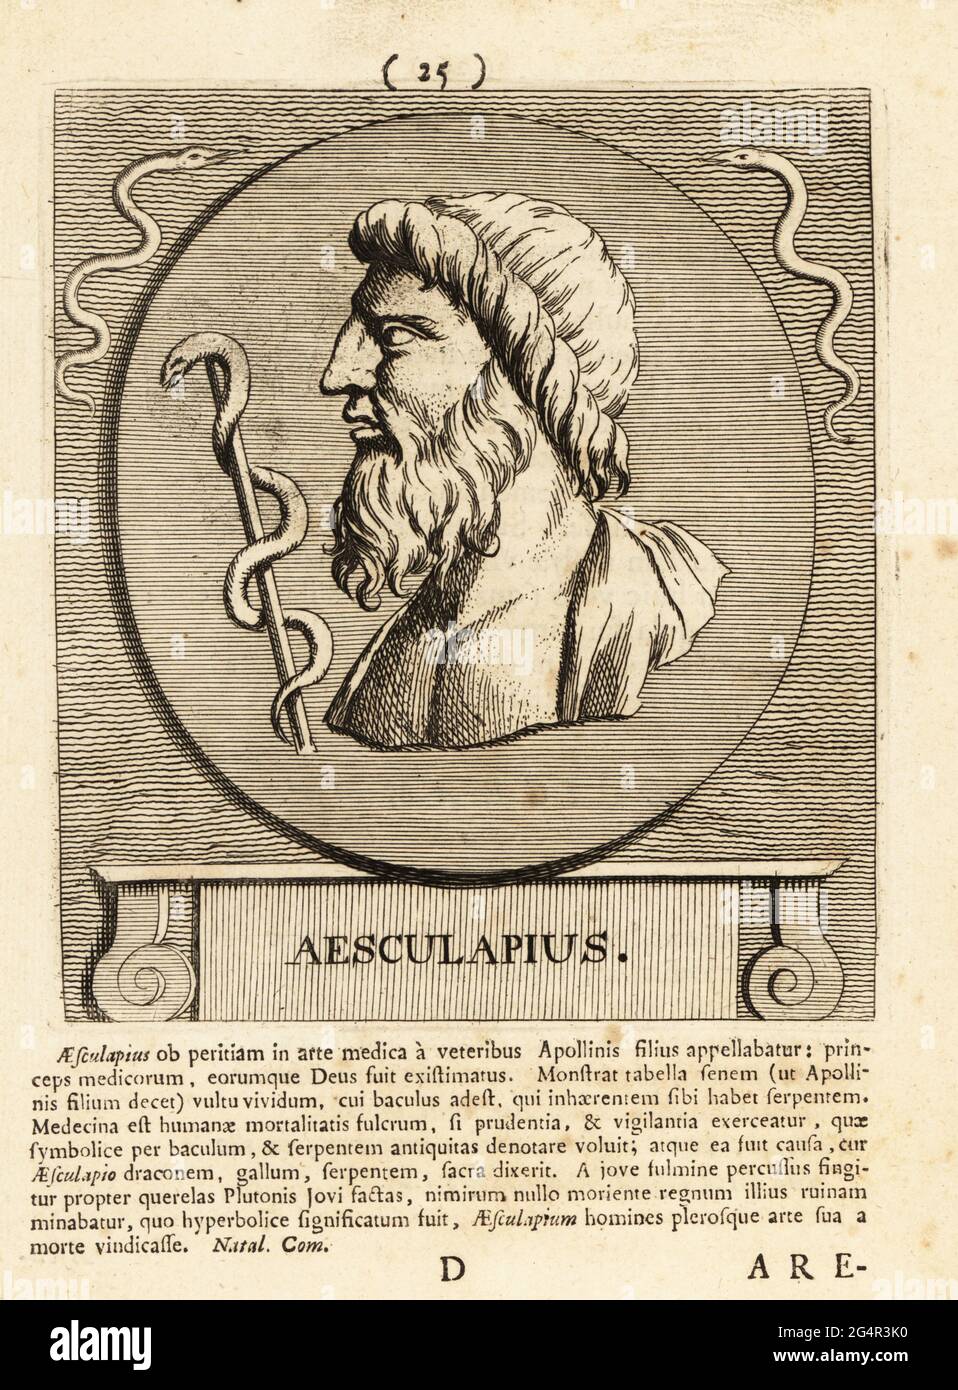 Asclepius or Hepius, hero and god of medicine in ancient Greek religion and mythology. With serpent-entwined staff and serpents. Copperplate engraving by Pieter Bodart (1676-1712) from Henricus Spoor’s Deorum et Heroum, Virorum et Mulierum Illustrium Imagines Antiquae Illustatae, Gods and Heroes, Men and Women, Illustrated with Antique Images, Petrum, Amsterdam, 1715. First published as Favissæ utriusque antiquitatis tam Romanæ quam Græcæ in 1707. Henricus Spoor was a Dutch physician, classical scholar, poet and writer, fl. 1694-1716. Stock Photo